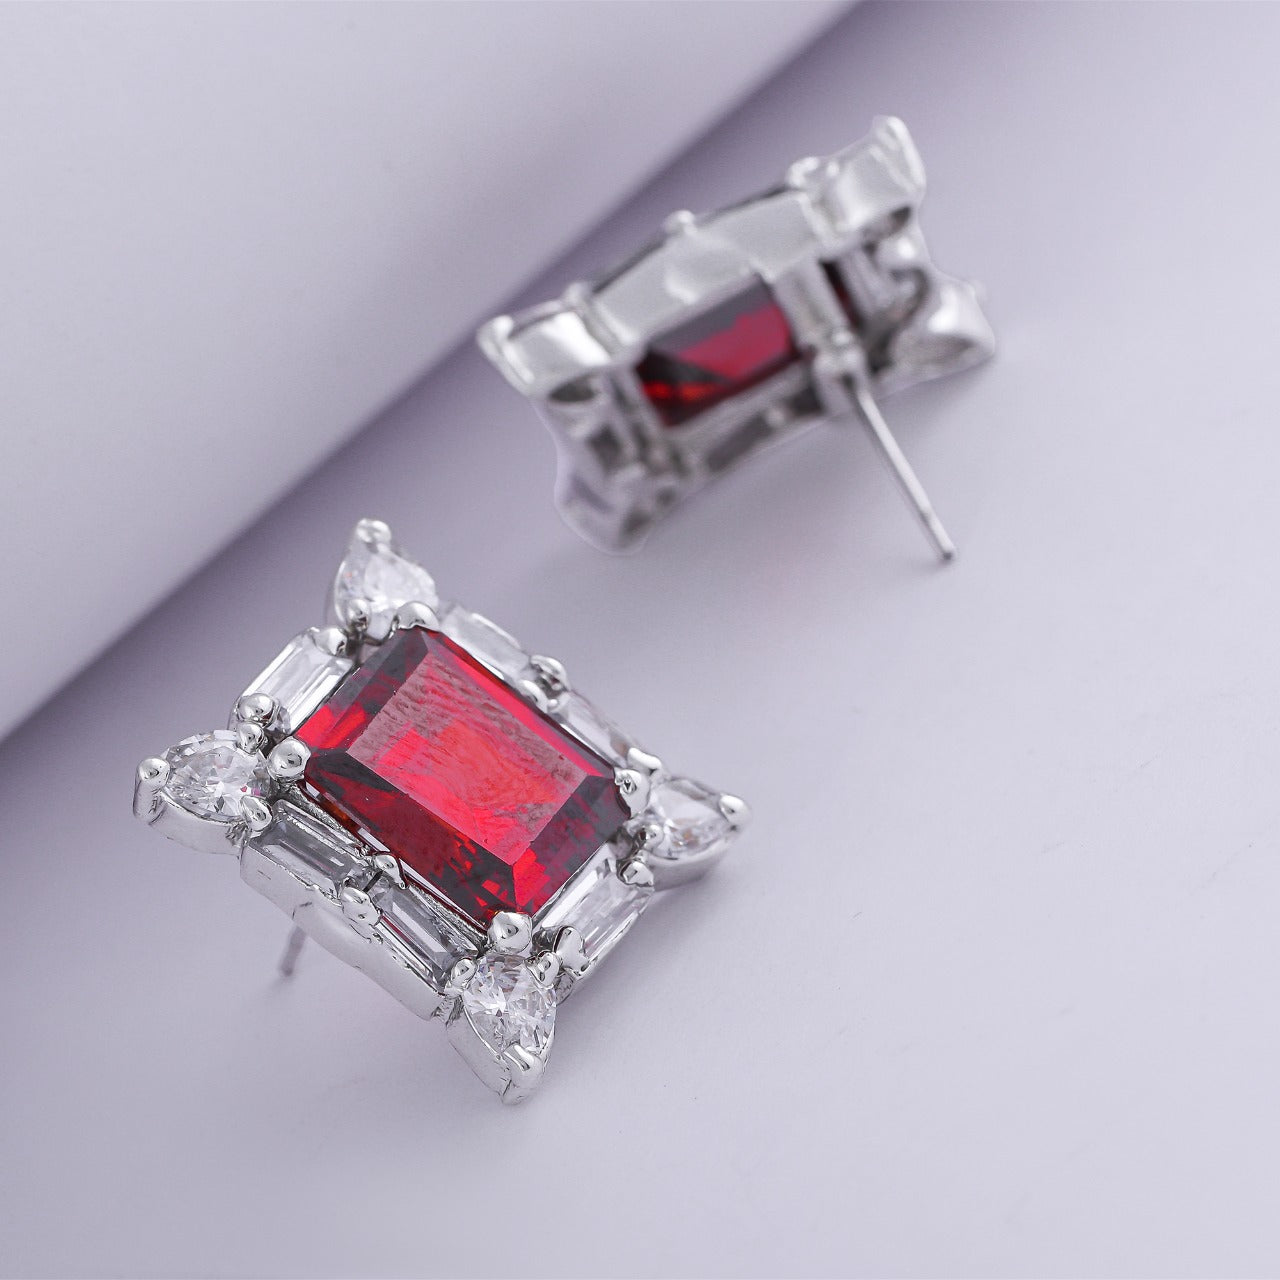 Estele Non-Precious Metal Gold and Silver Plated American Diamond Ruby Stud Earrings for Girls